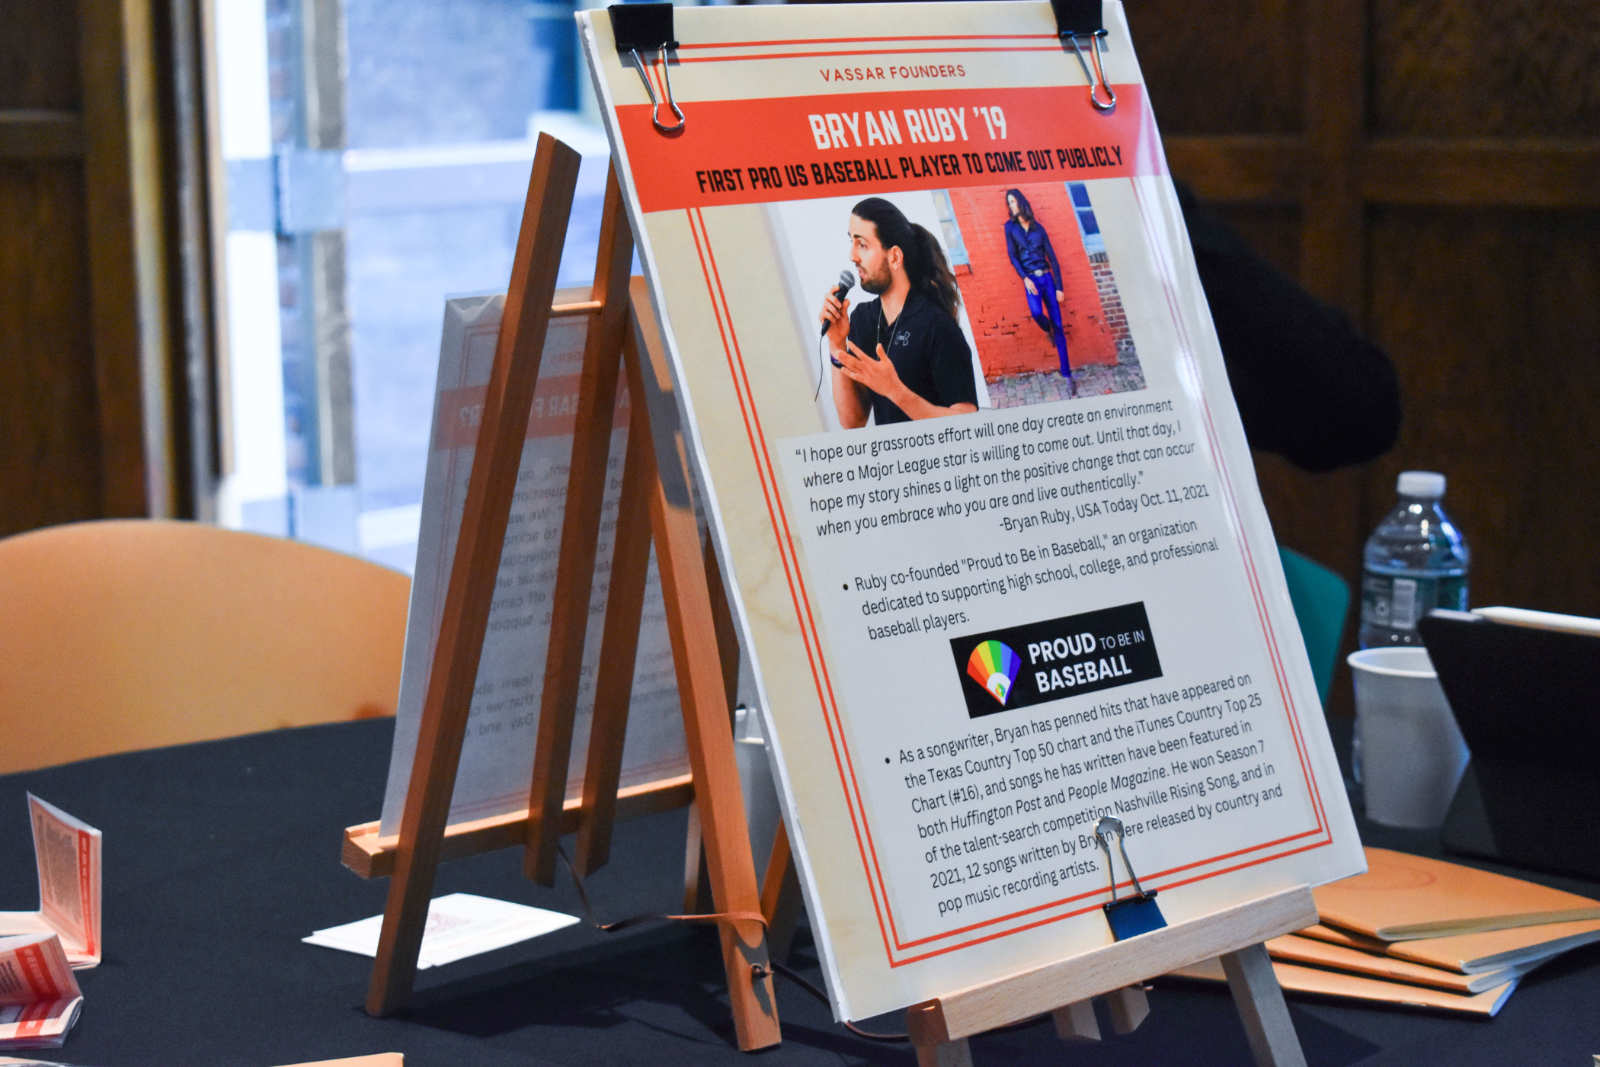 A poster placed on a table. The poster reads “Bryan Ruby '19: First Pro Us Baseball Player to Come Out Publicly.”